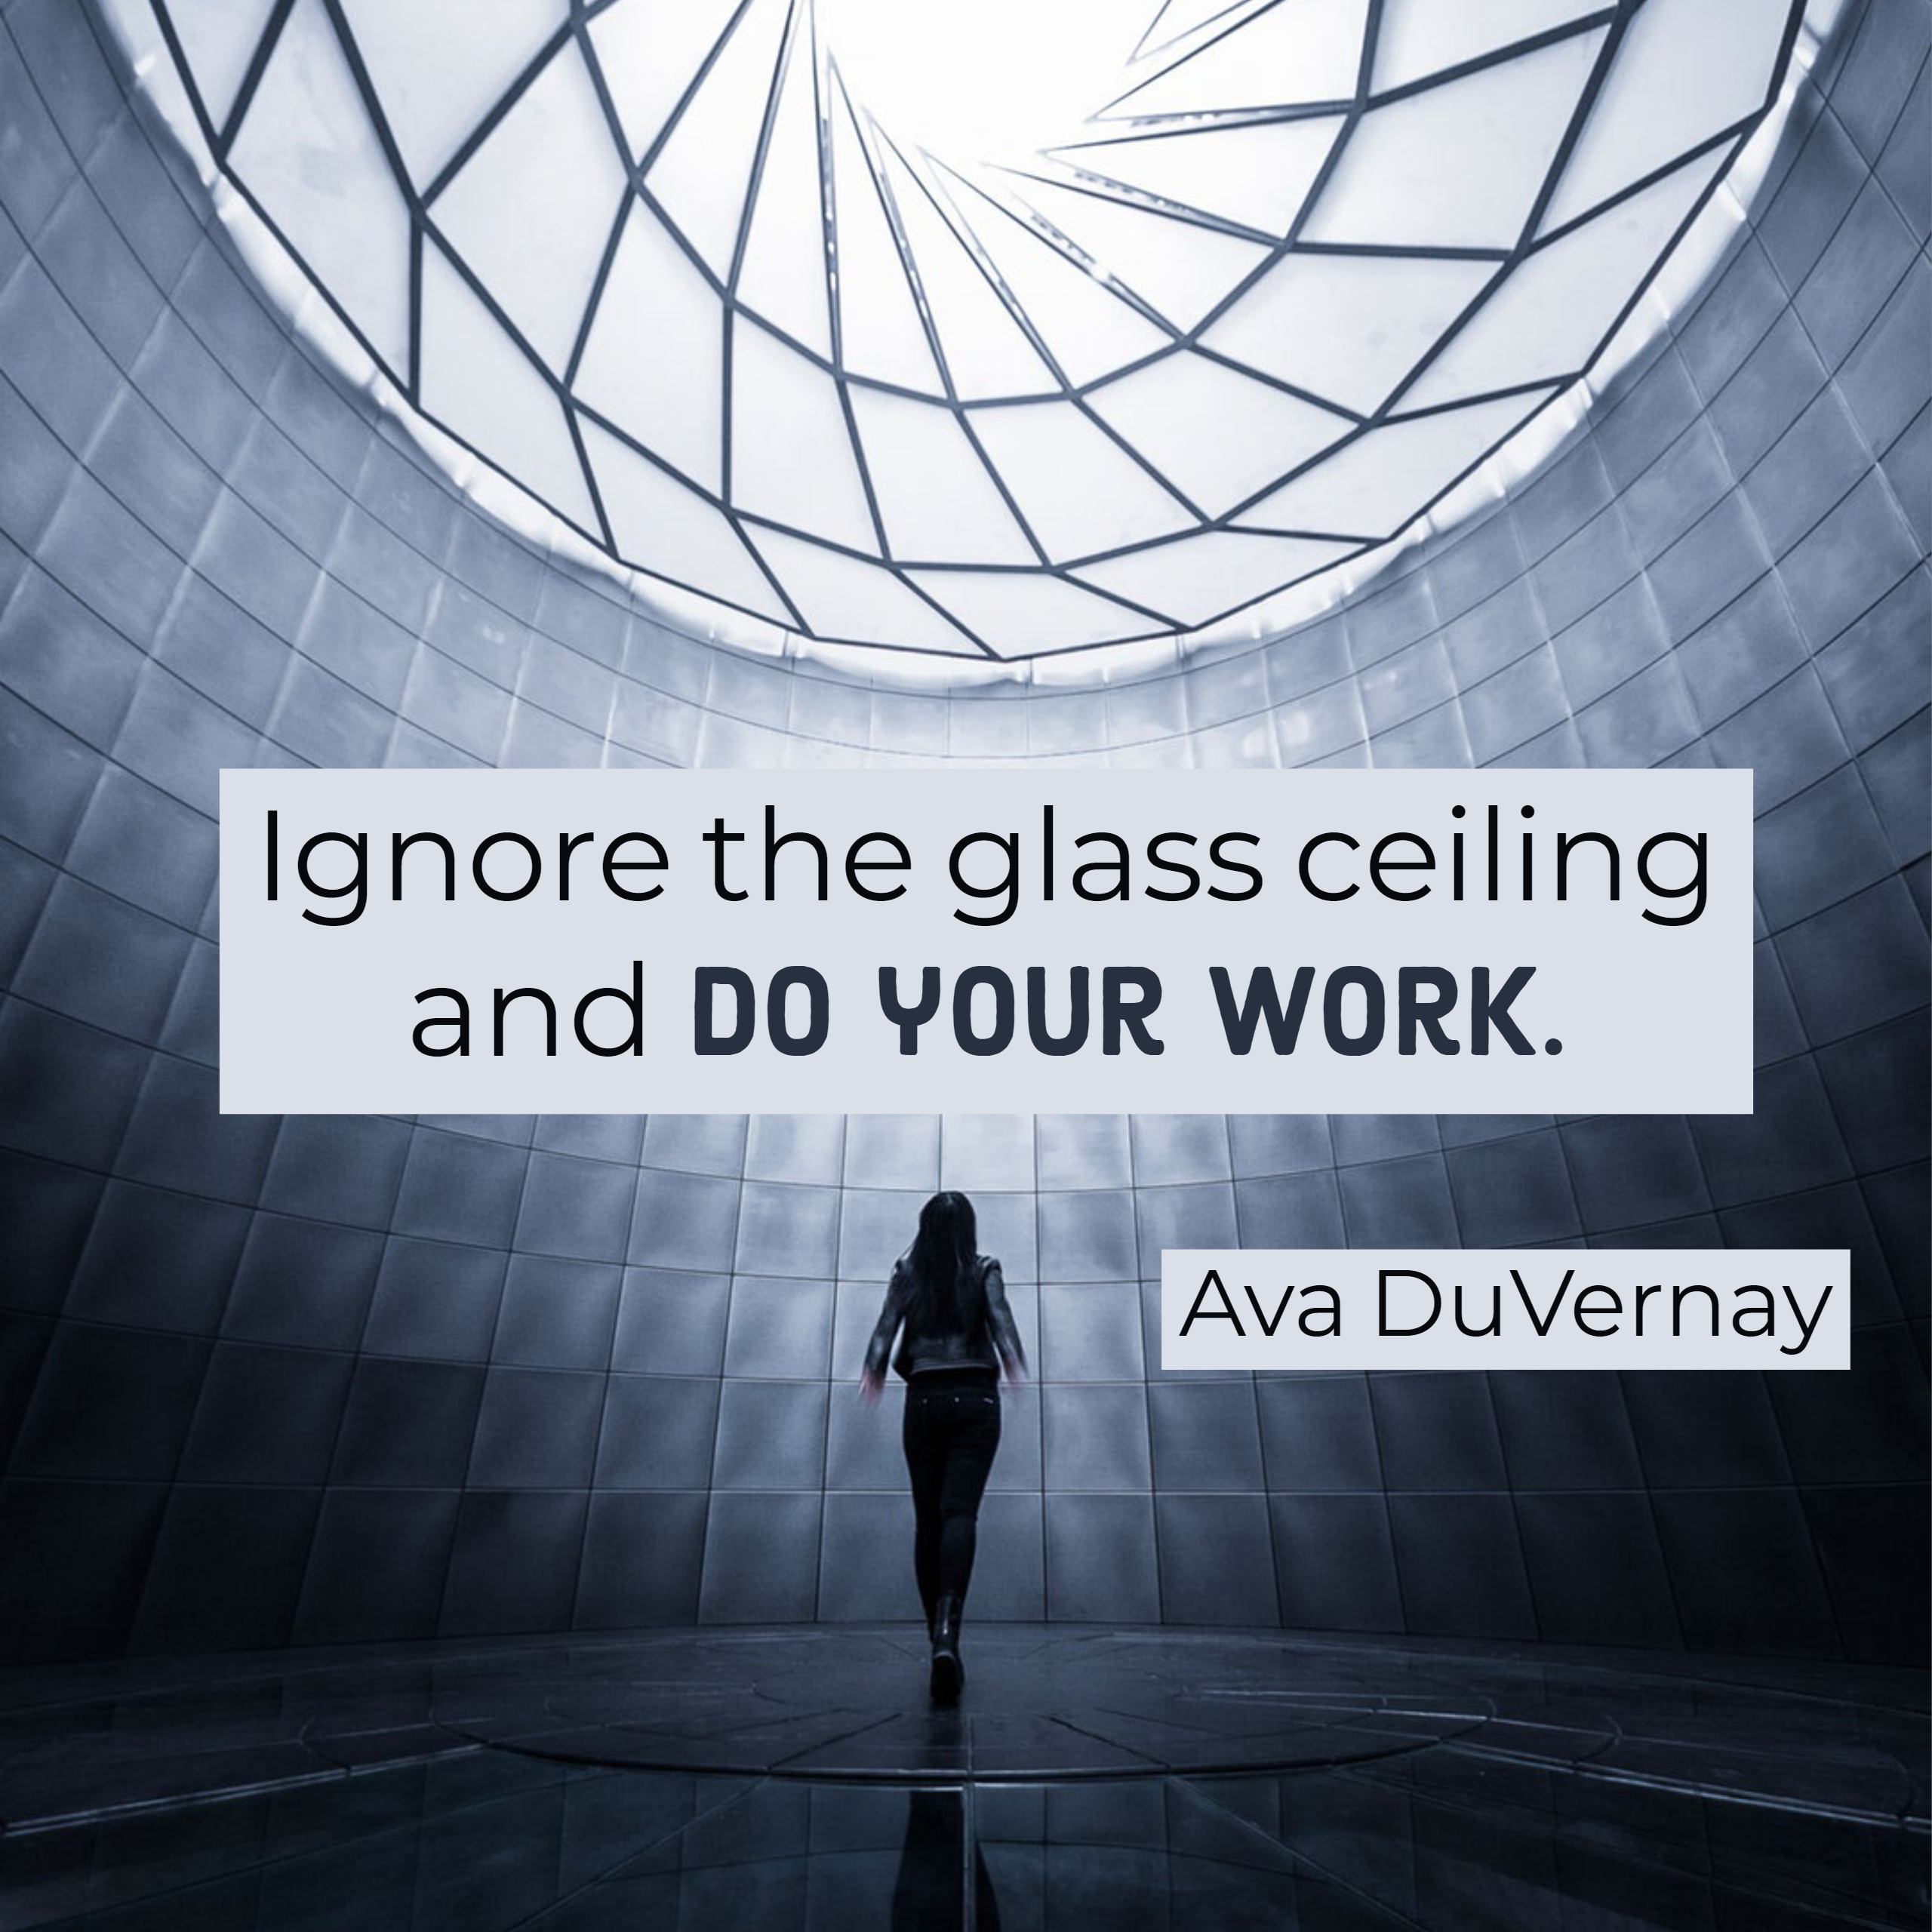 Ignore the glass ceiling and do your work.